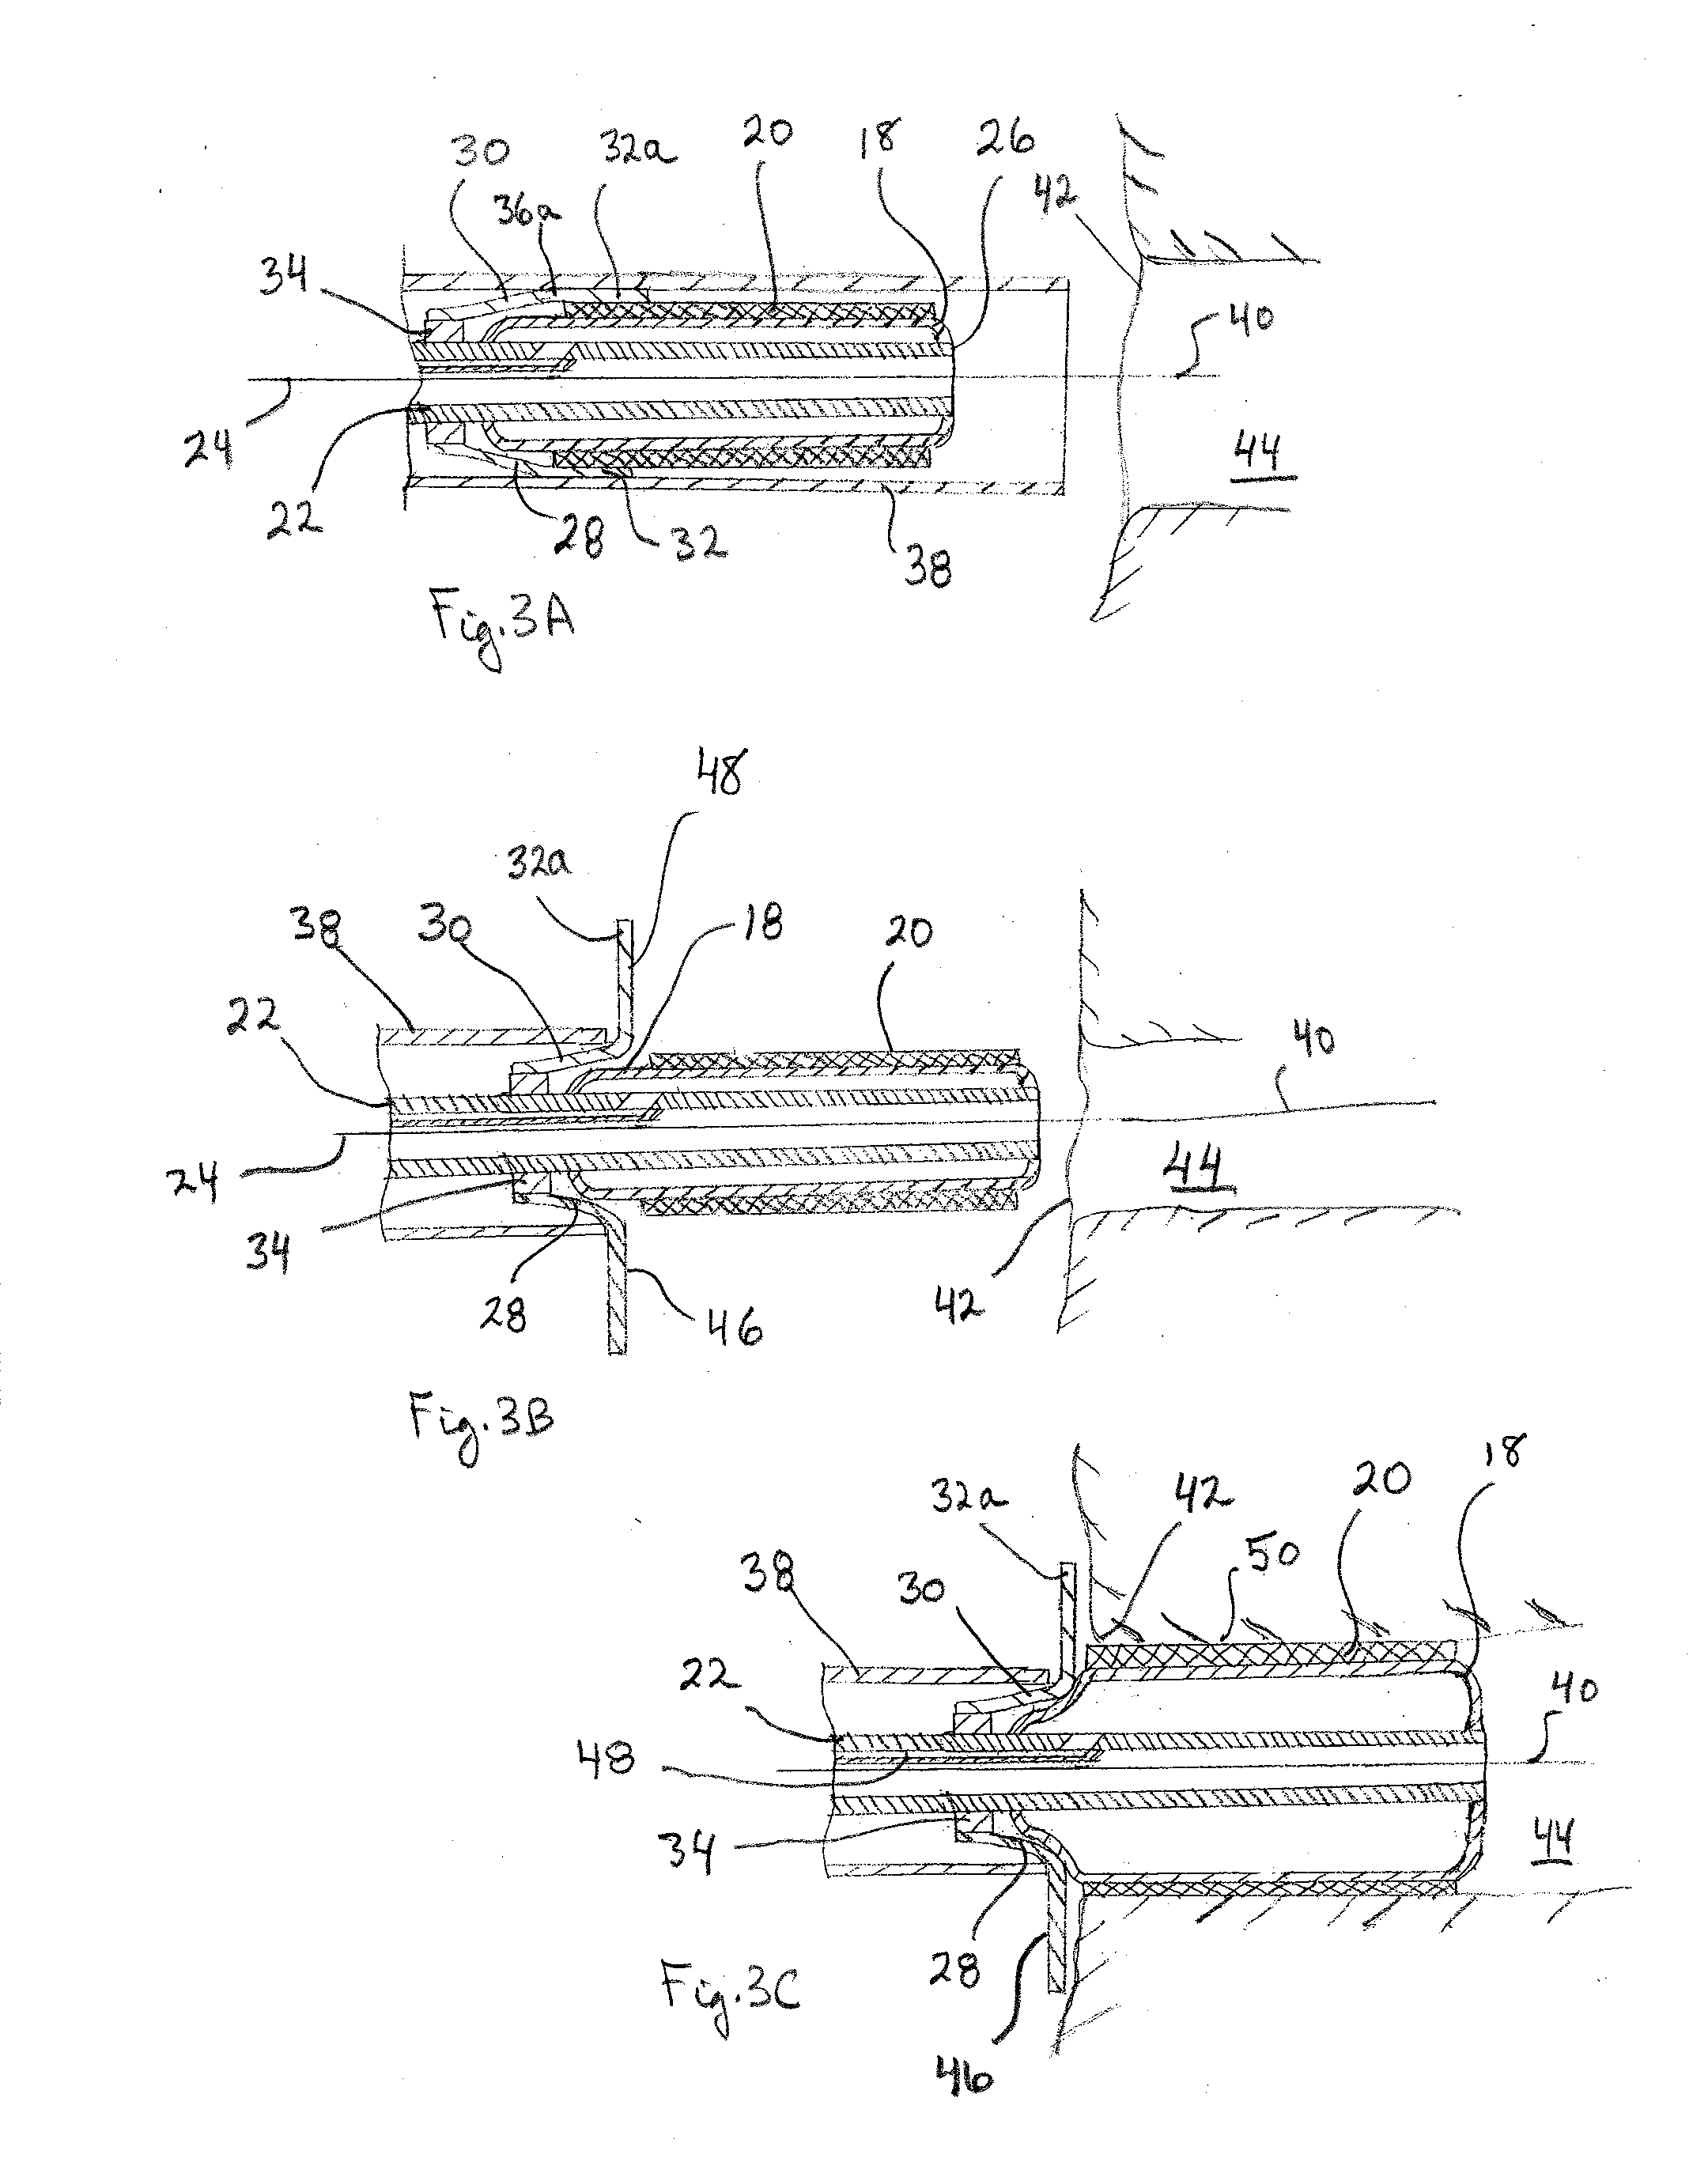 System and Method for Placing a Coronary Stent at the Ostium of a Blood Vessel